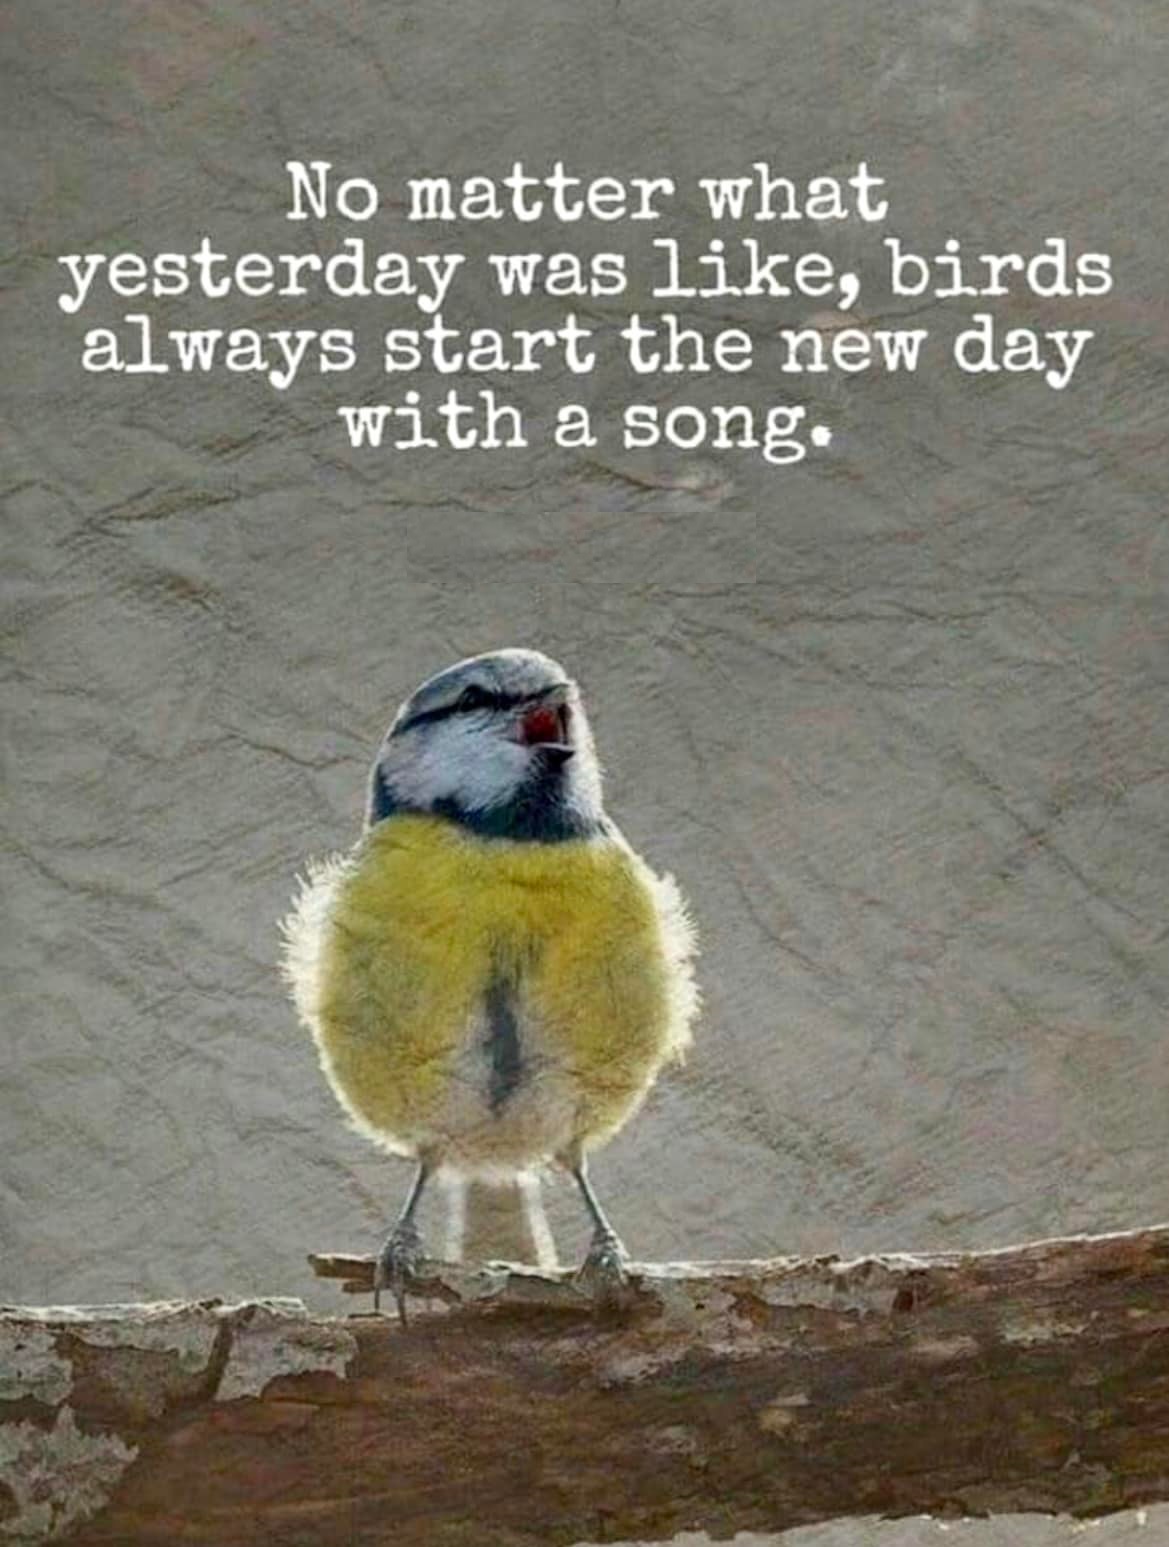 No matter what yesterday was like, birds always start the new day with a song